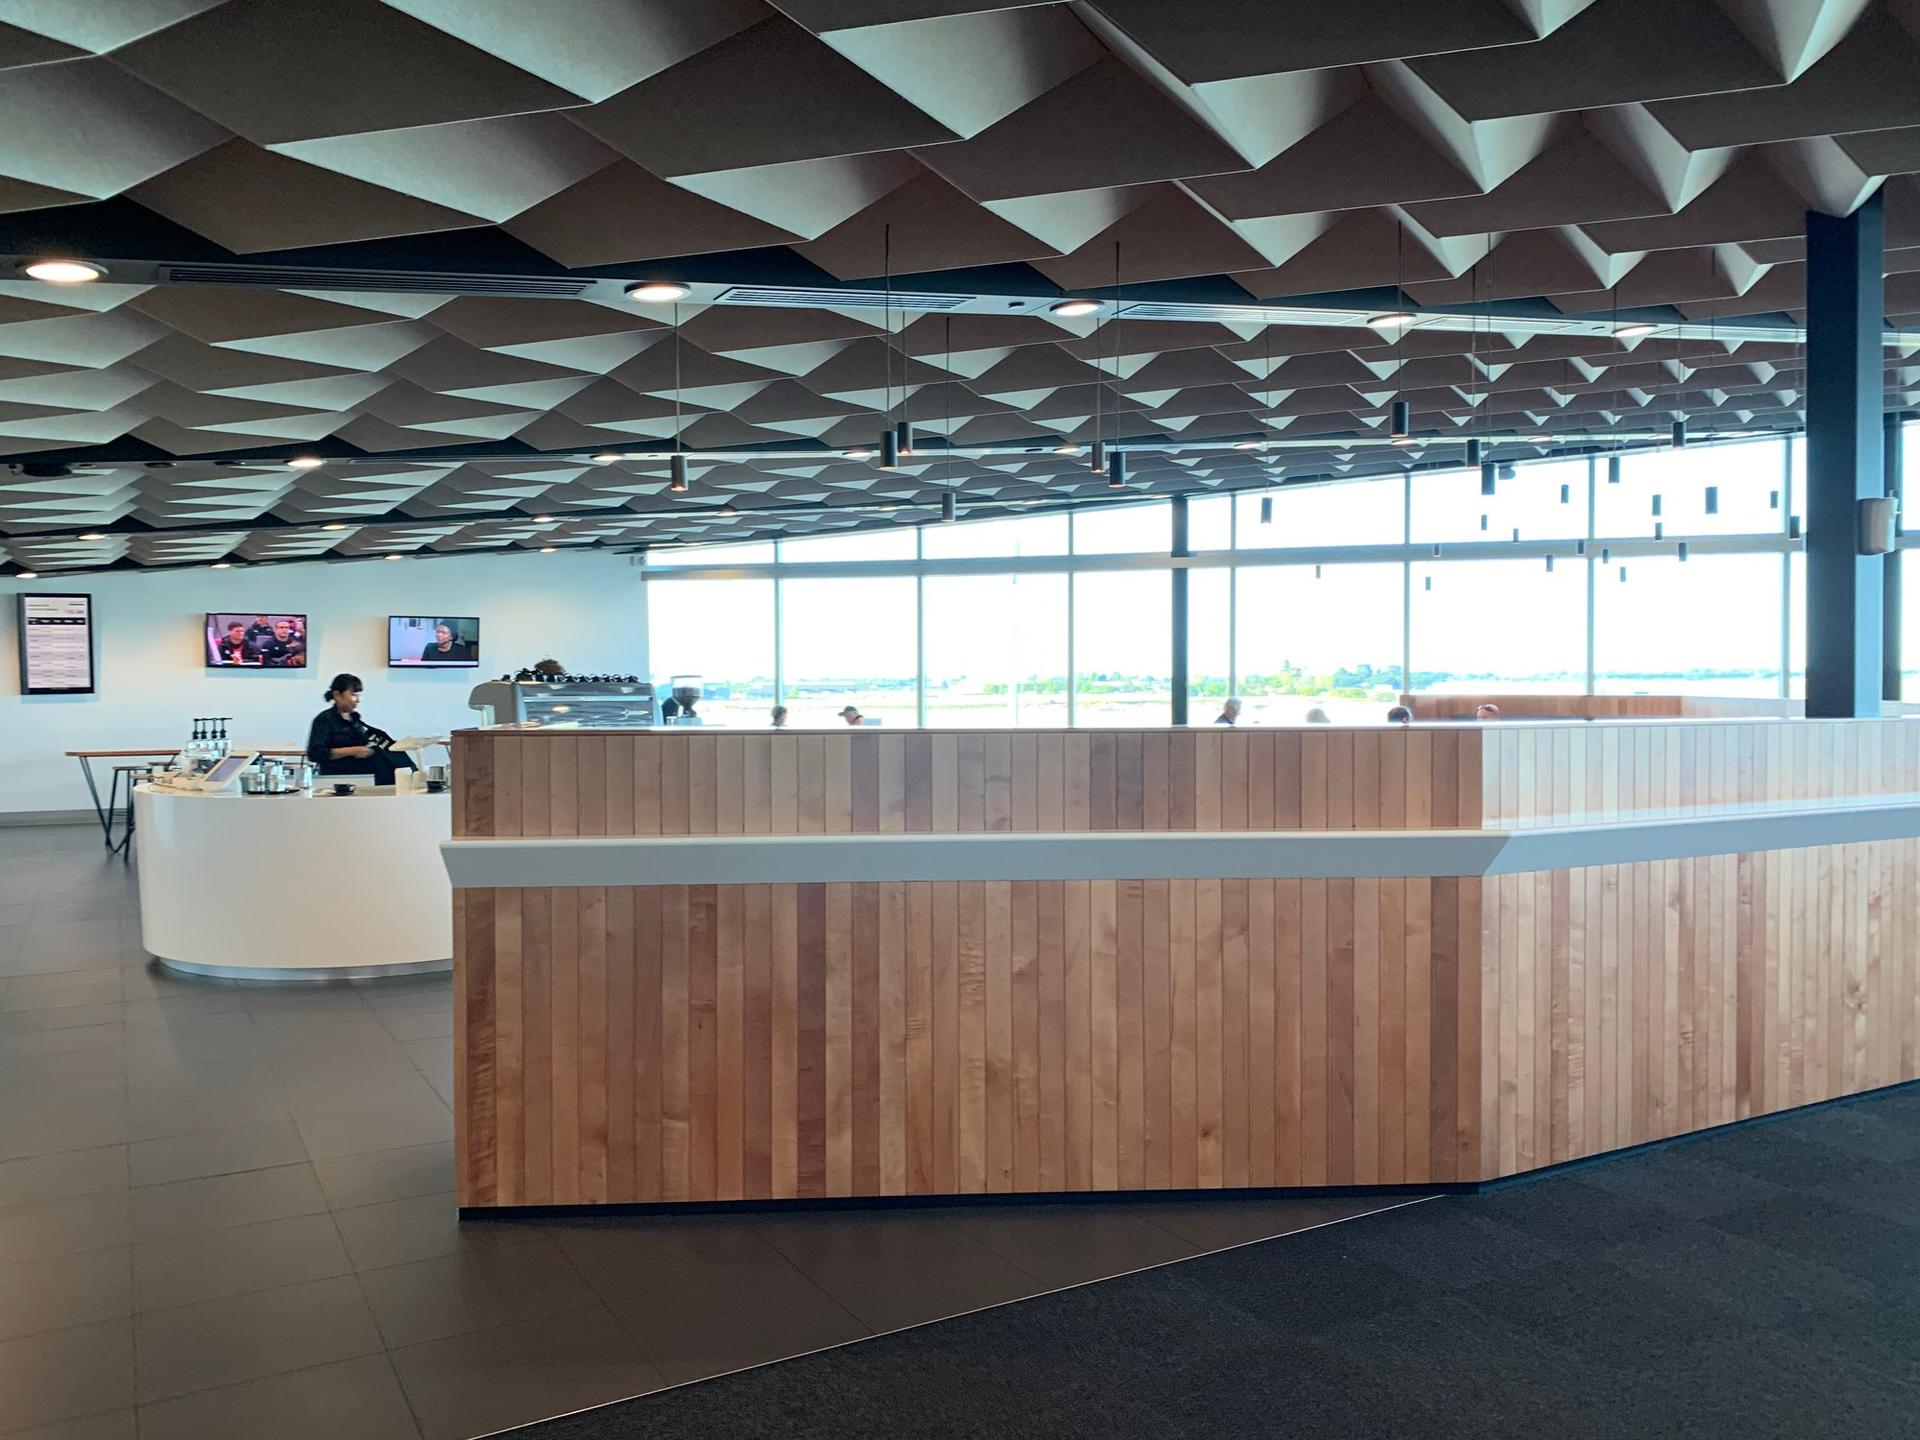 Air New Zealand Domestic Lounge image 3 of 6